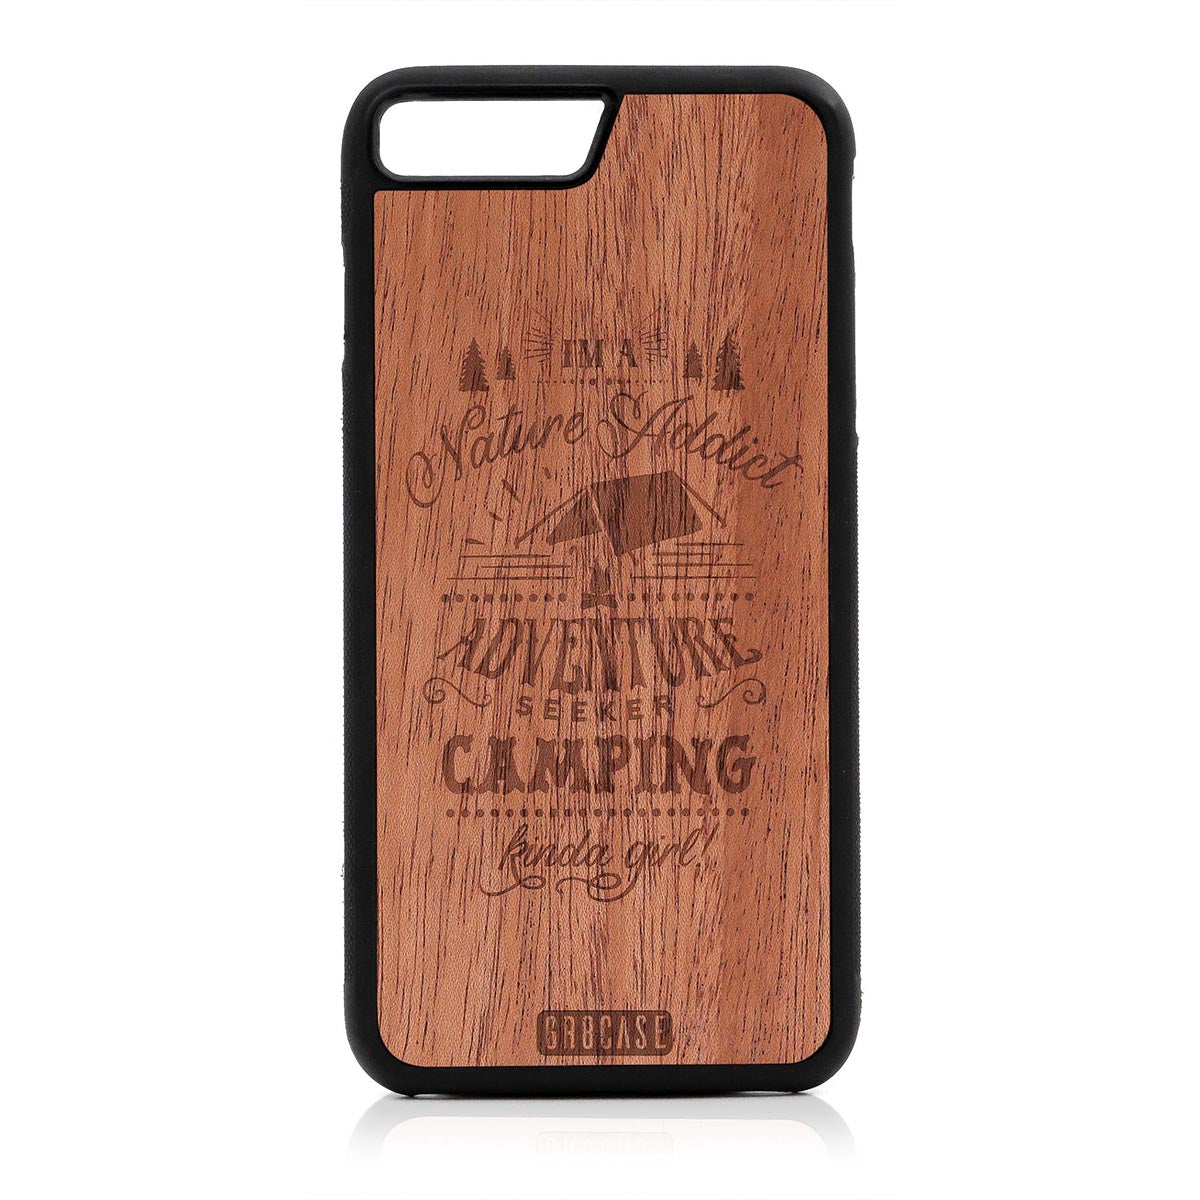 I'm A Nature Addict Adventure Seeker Camping Kinda Girl Design Wood Case For iPhone 7 Plus / 8 Plus by GR8CASE